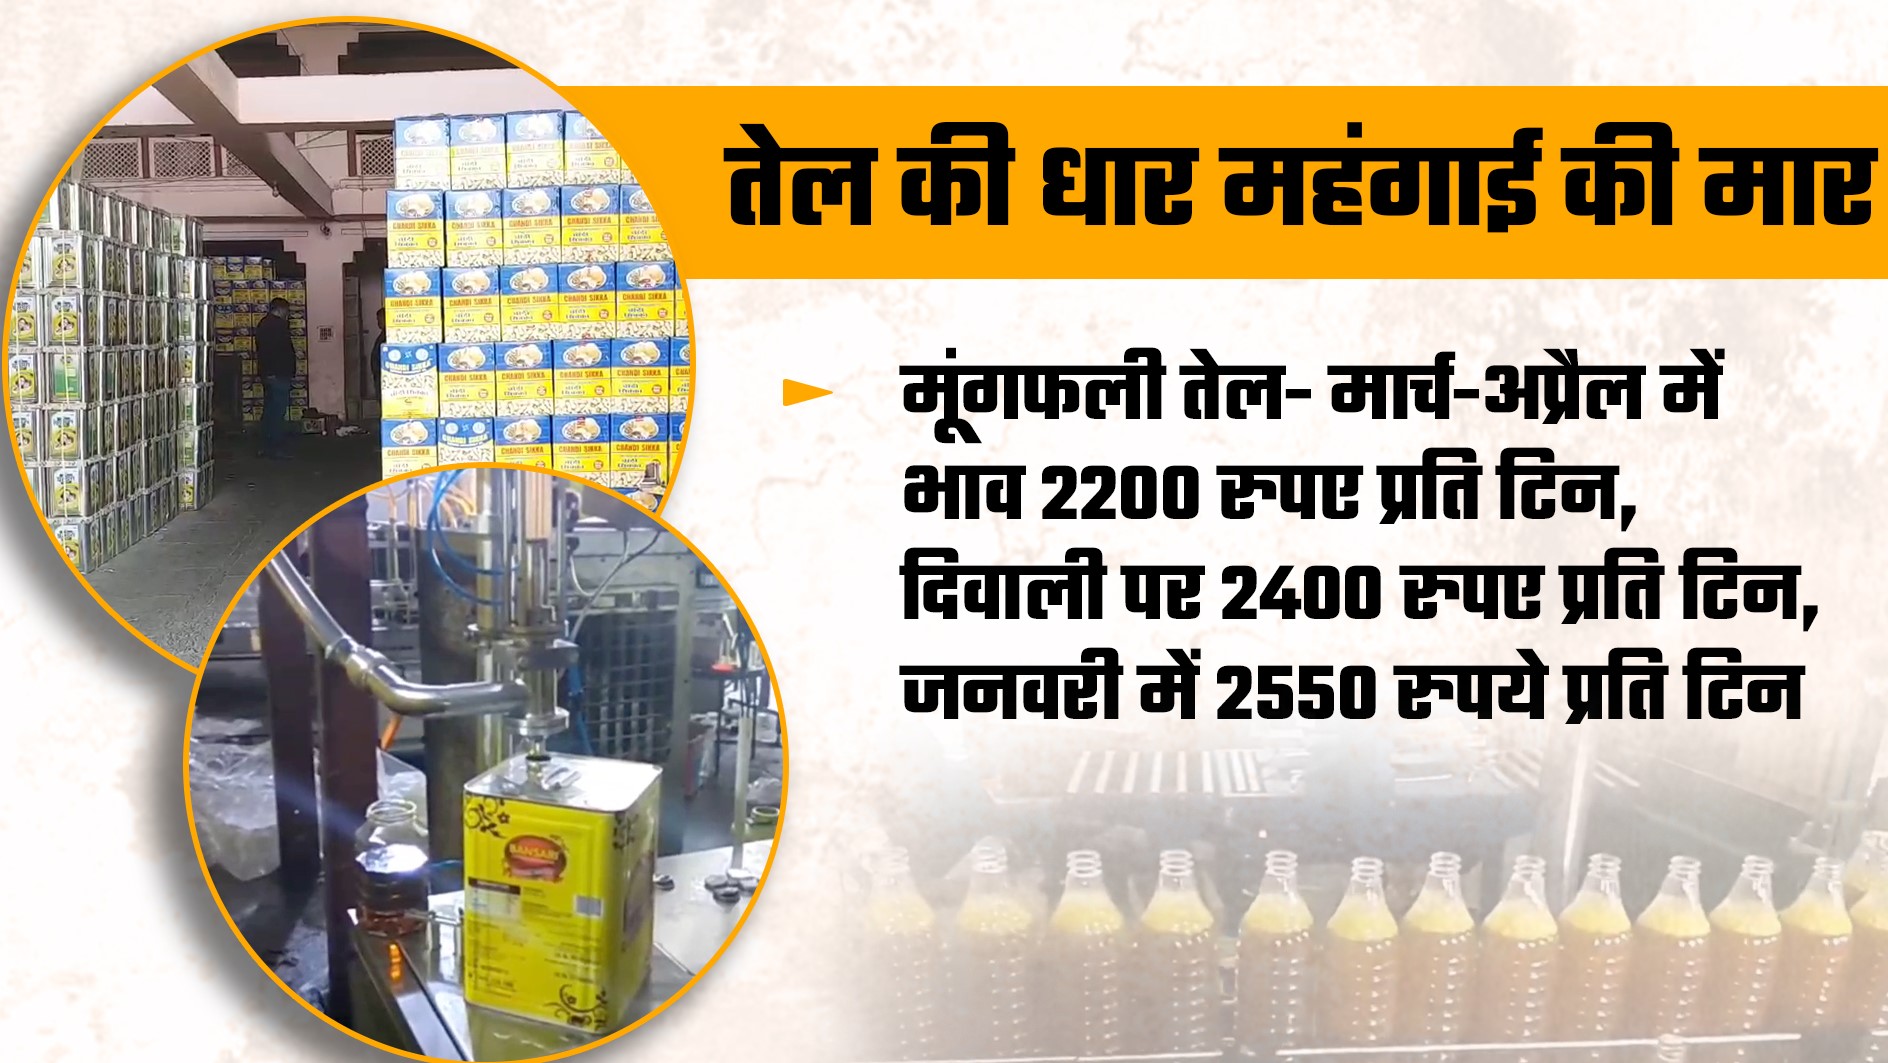 Price of edible oils, Price of edible oils increased, Edible oil up to 800 rupees per tin, Soybean oil prices, Mustard fried prices, Peanut oil prices, Palm oil prices